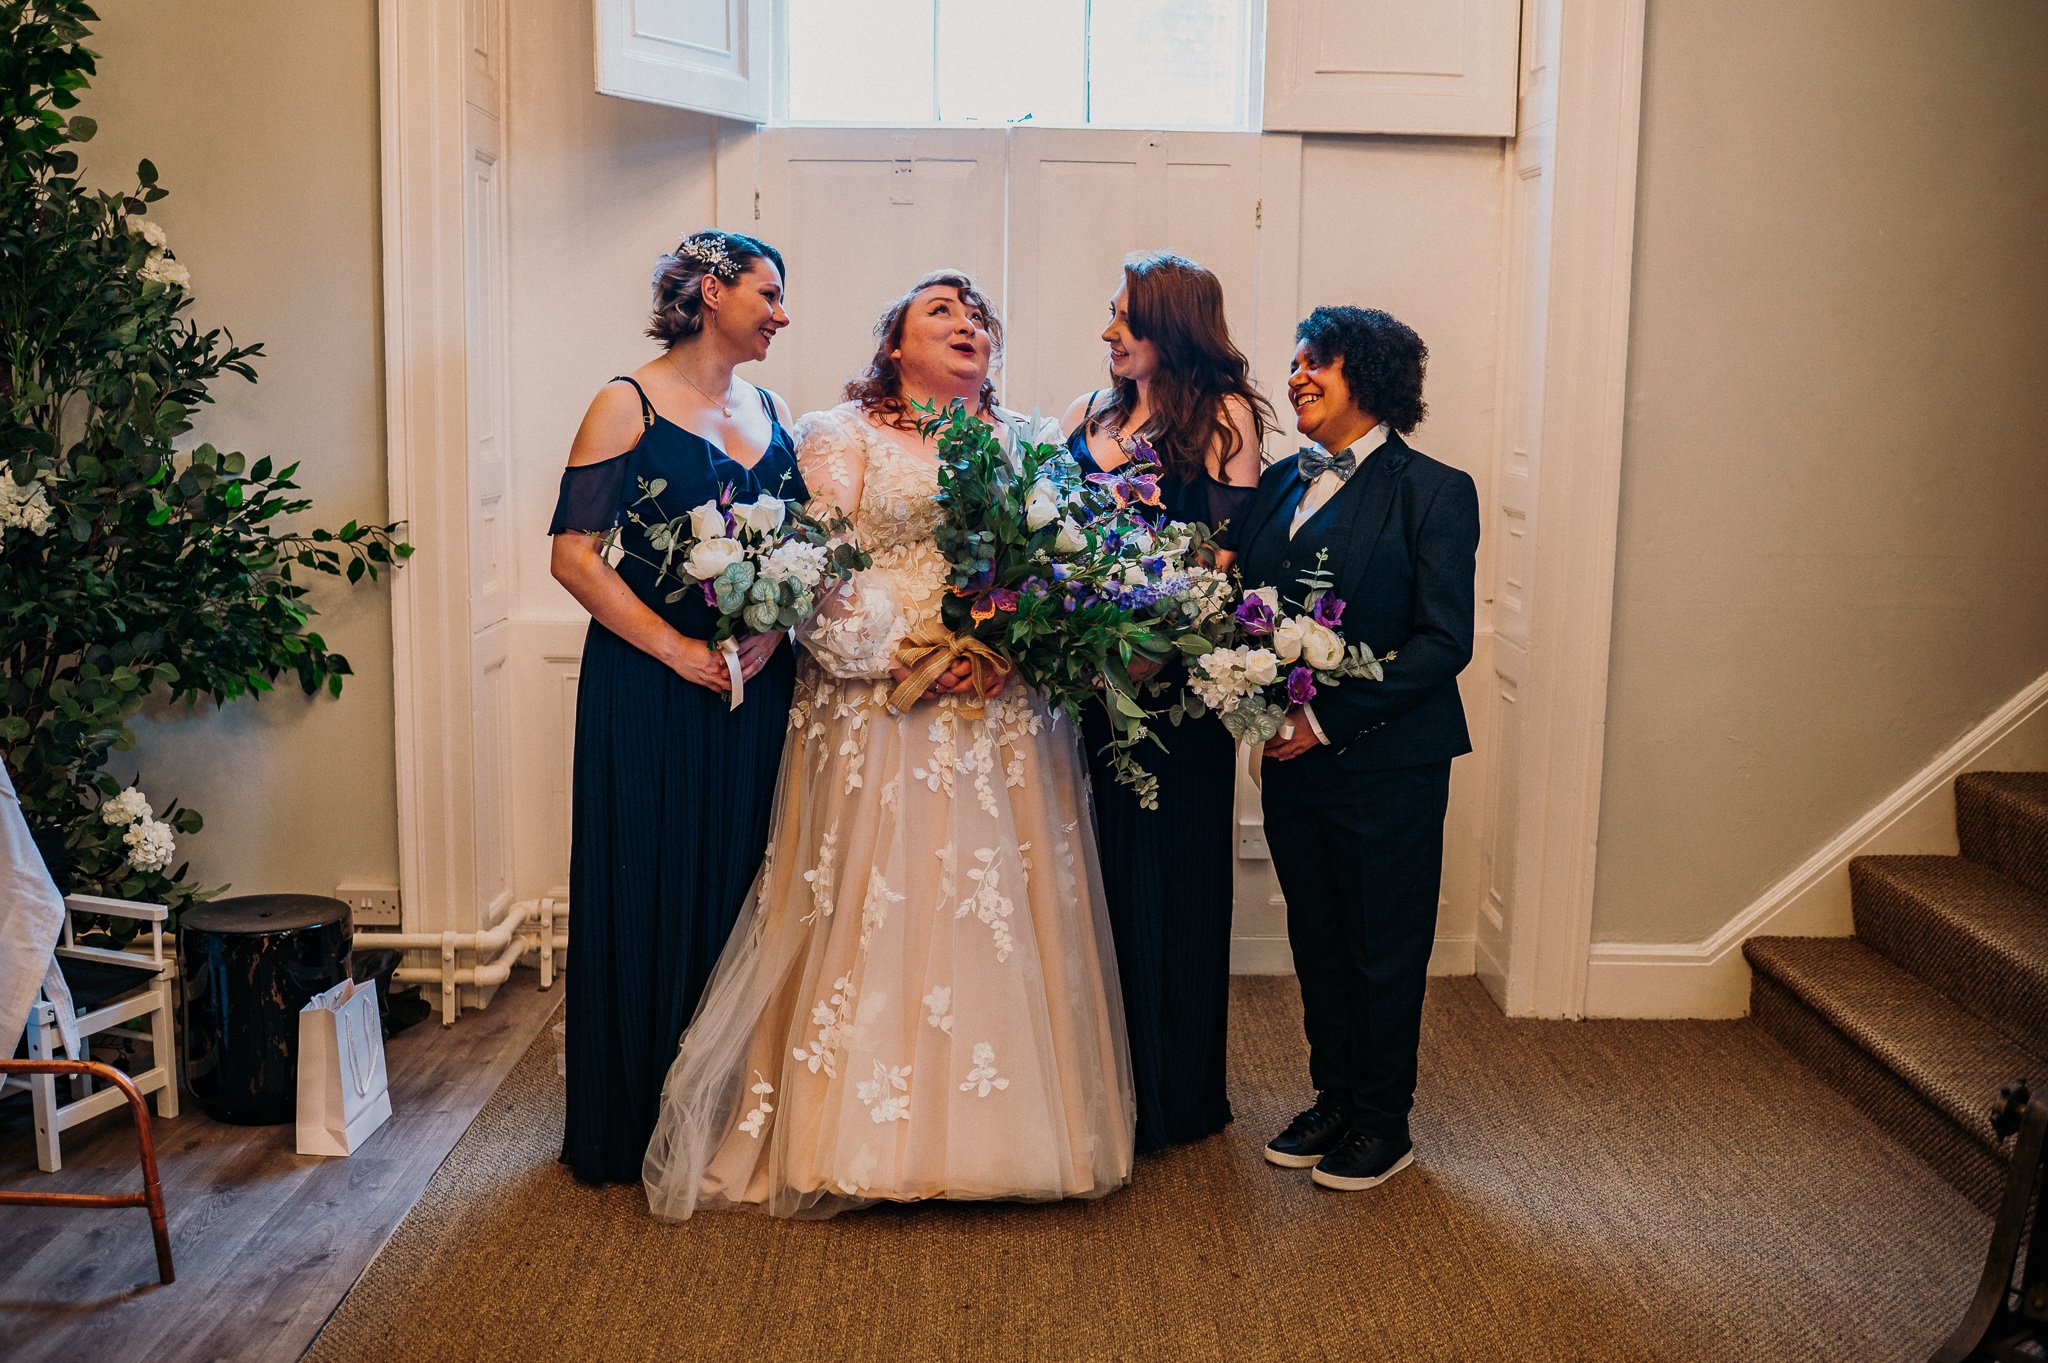 The bride and bridesmaids chatting a laughing about something in the preparation room at Sneaton Castle, Whitby.